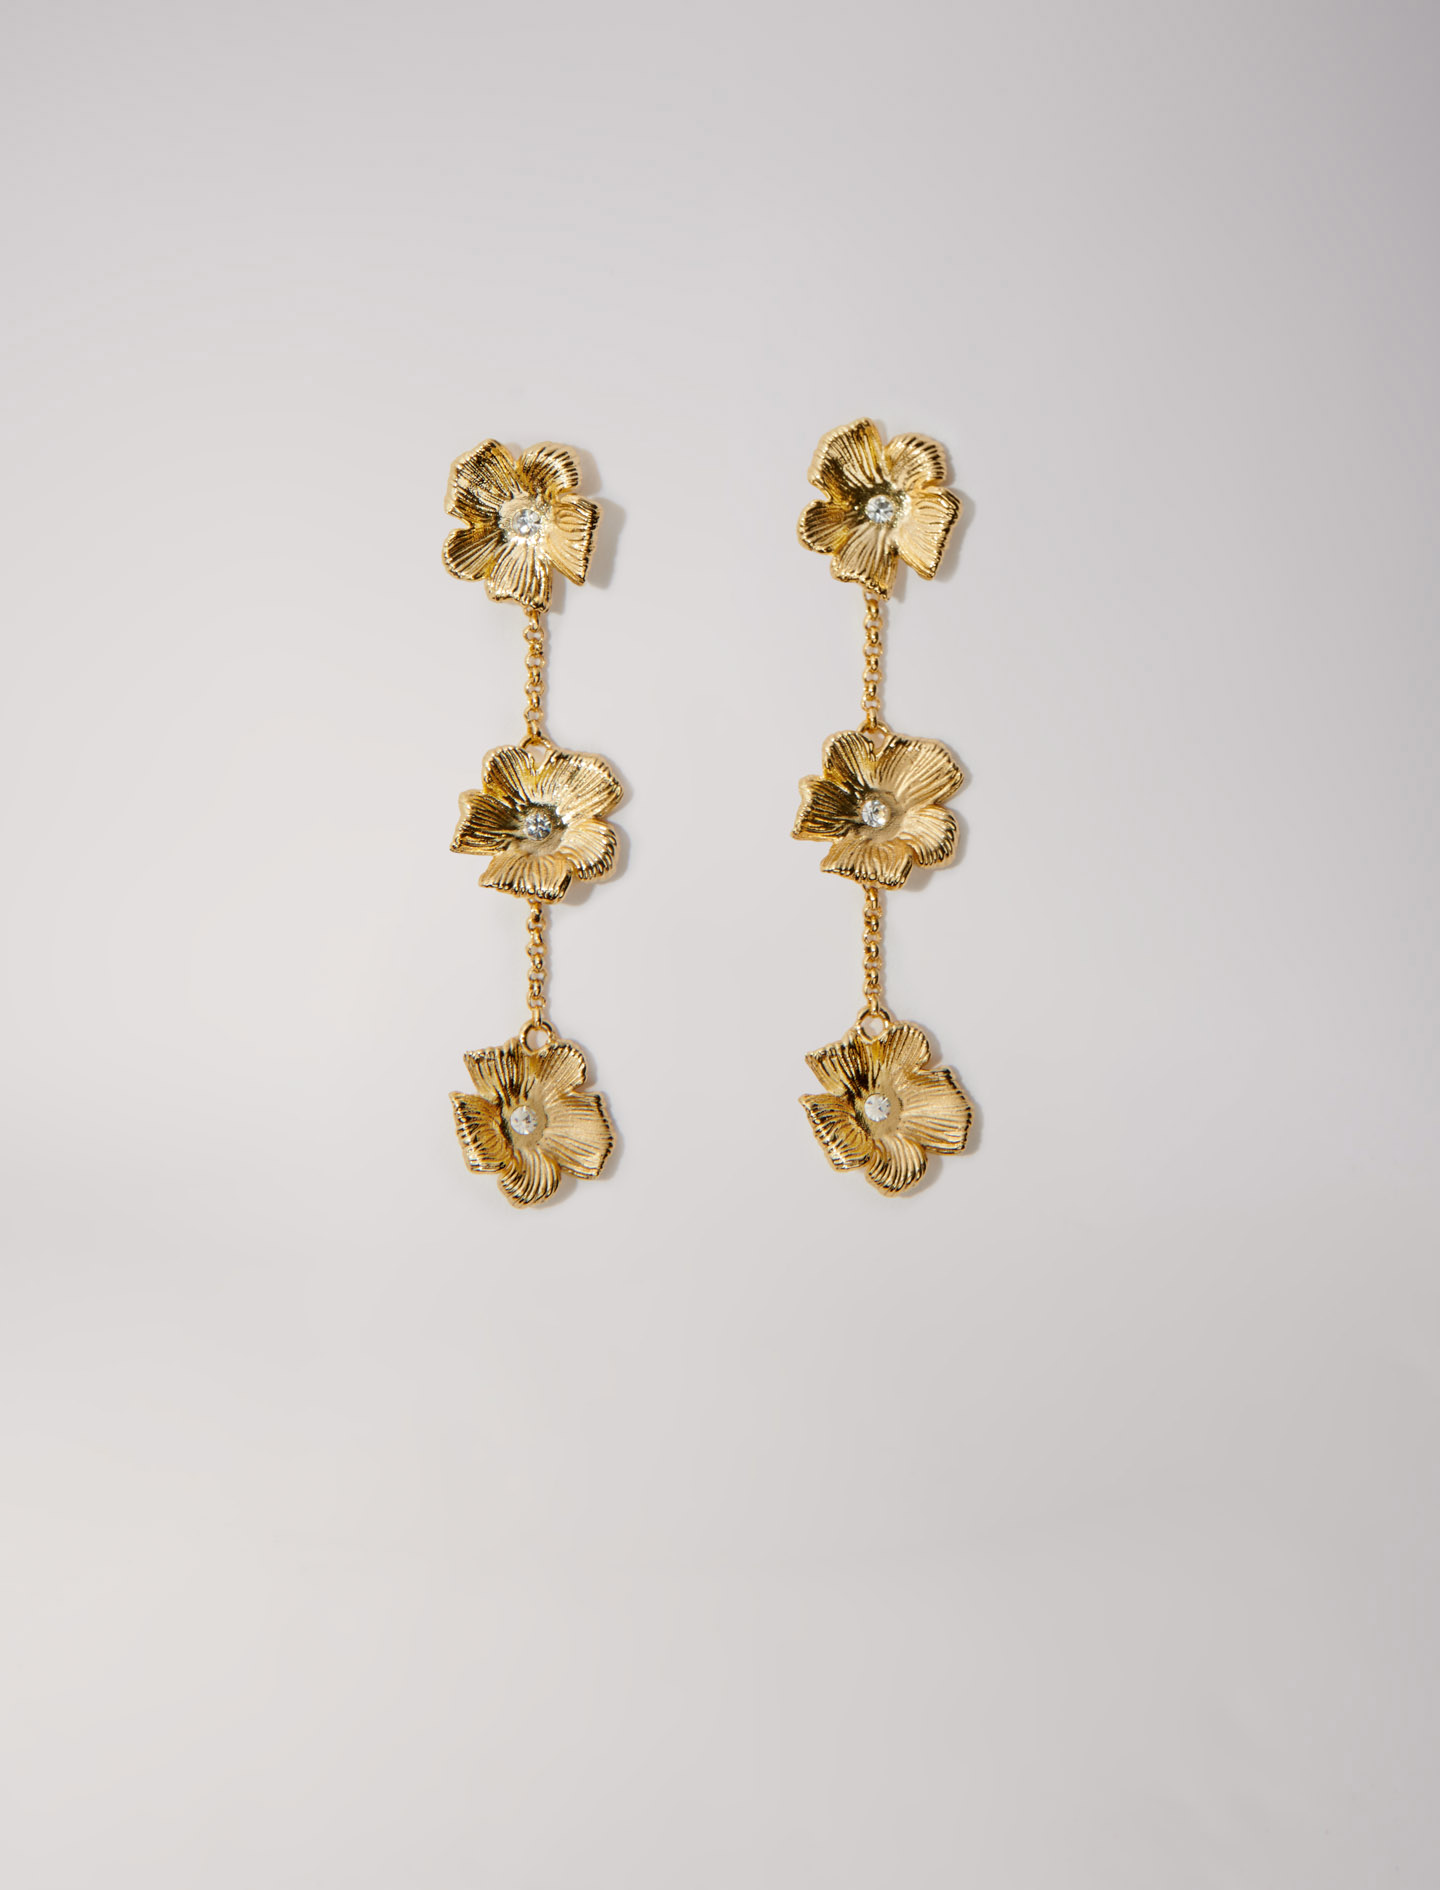 Maje Woman's glass Jewellery: Flower earrings for Spring/Summer, in color Gold / Yellow